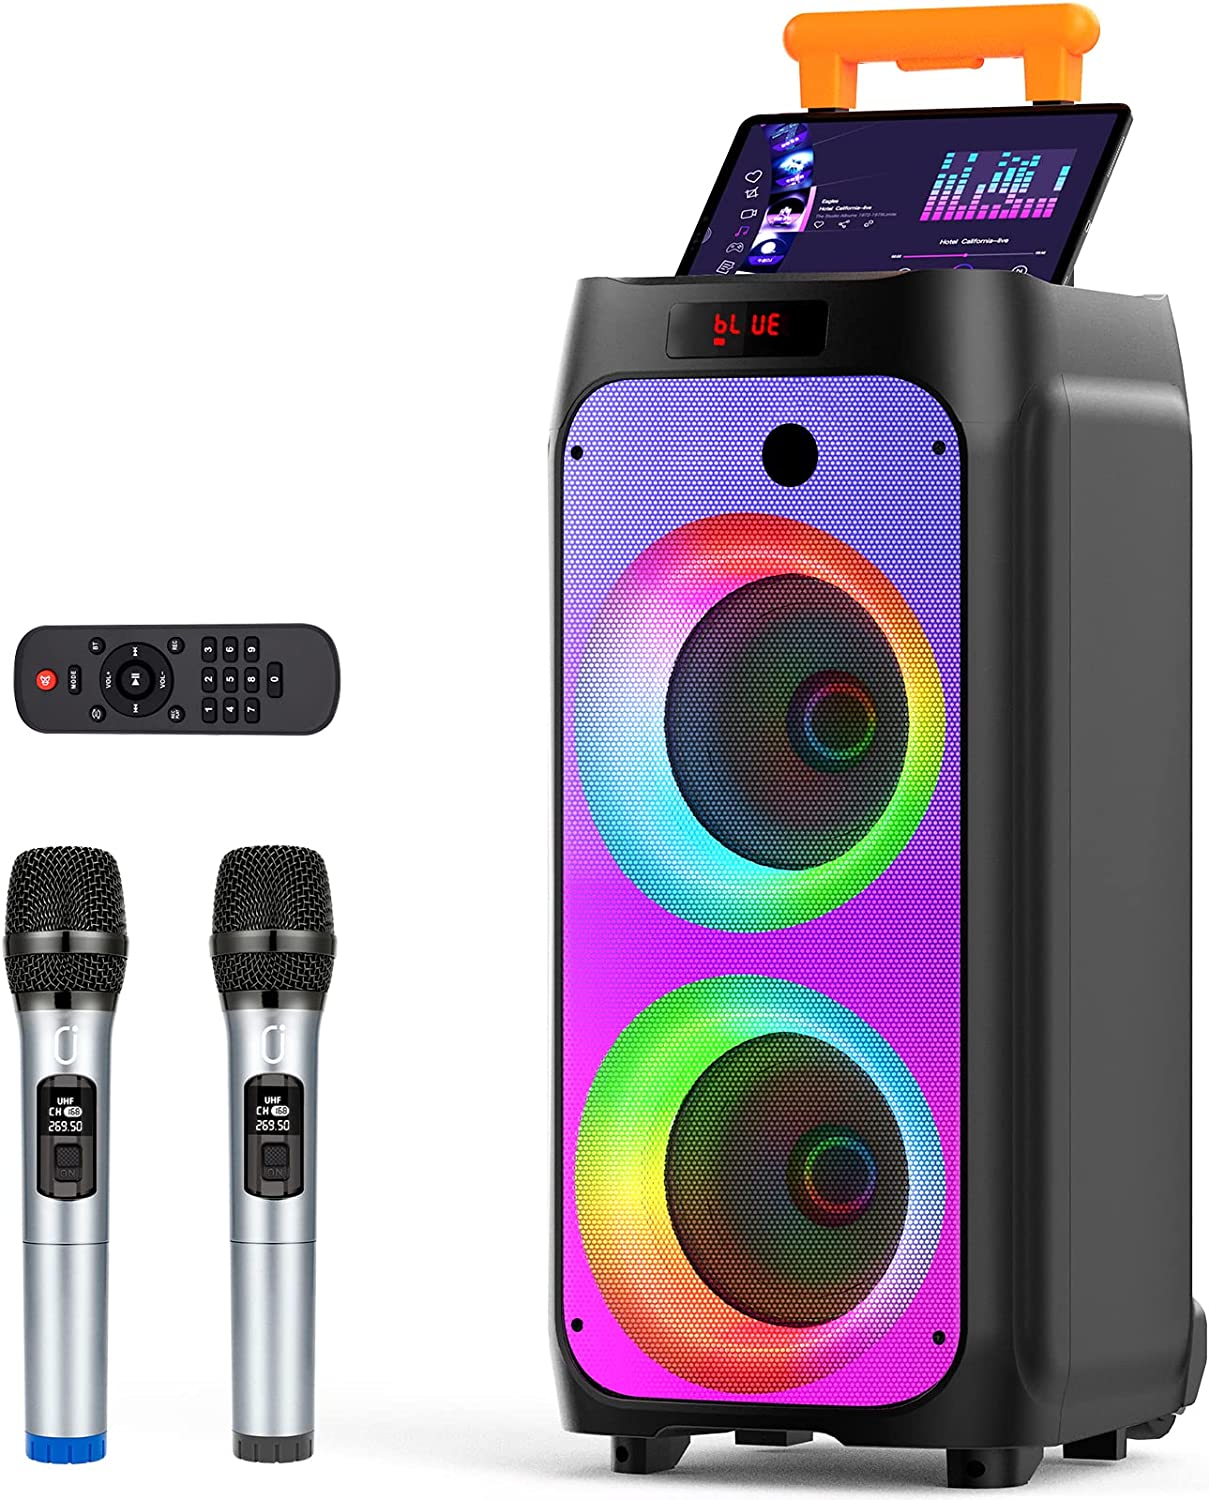 Karaoke Machine with Wireless Microphones Bluetooth Enabled